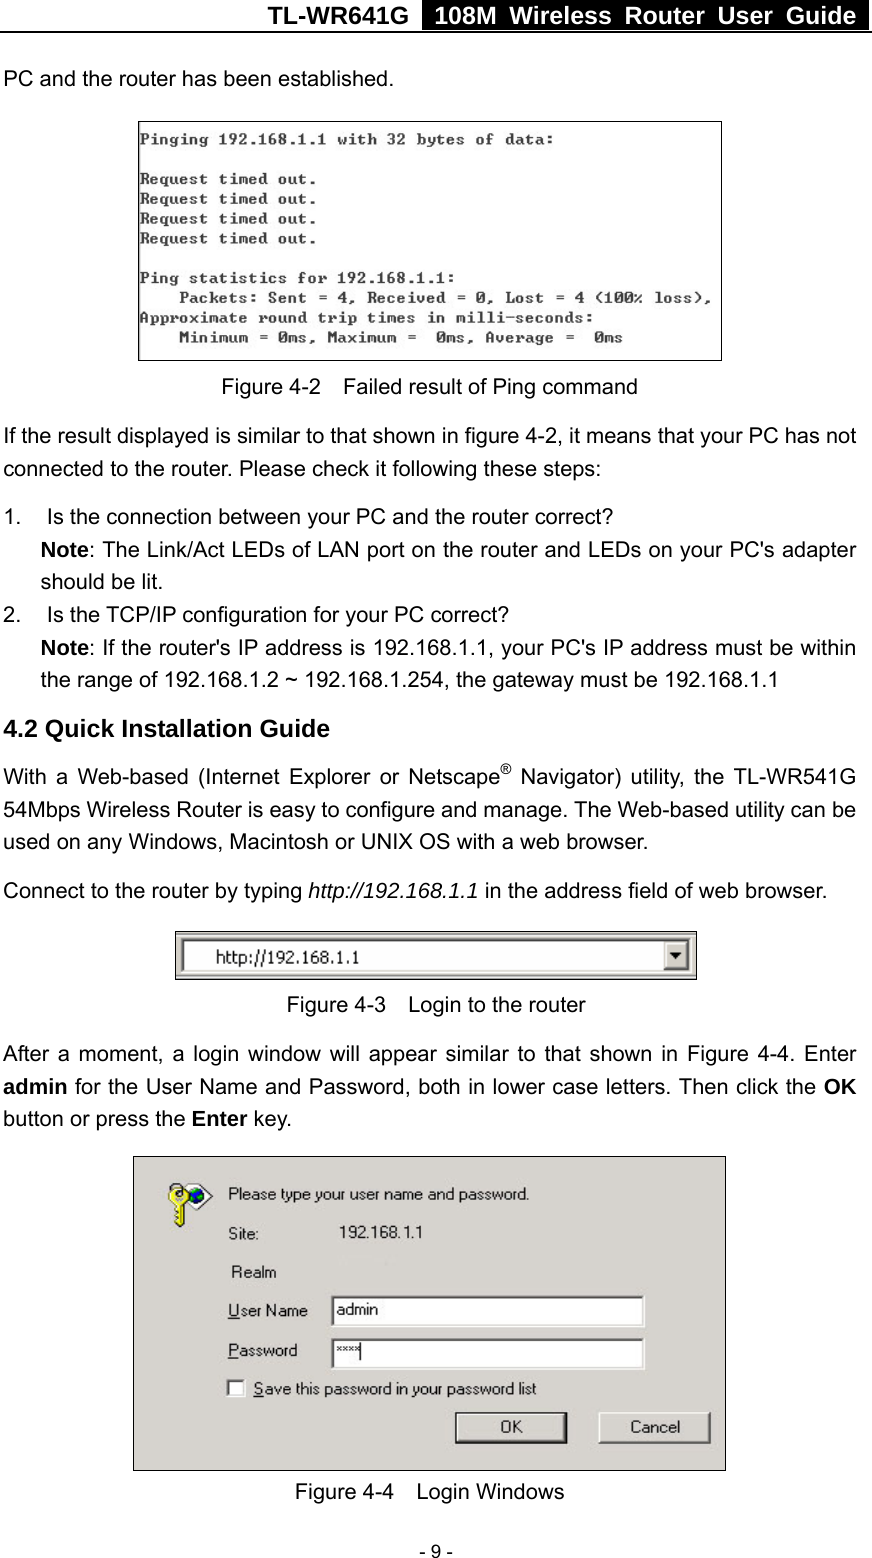 TL-WR641G   108M Wireless Router User Guide   - 9 -PC and the router has been established.    Figure 4-2    Failed result of Ping command If the result displayed is similar to that shown in figure 4-2, it means that your PC has not connected to the router. Please check it following these steps: 1.  Is the connection between your PC and the router correct? Note: The Link/Act LEDs of LAN port on the router and LEDs on your PC&apos;s adapter should be lit. 2. Is the TCP/IP configuration for your PC correct? Note: If the router&apos;s IP address is 192.168.1.1, your PC&apos;s IP address must be within the range of 192.168.1.2 ~ 192.168.1.254, the gateway must be 192.168.1.1 4.2 Quick Installation Guide With a Web-based (Internet Explorer or Netscape® Navigator) utility, the TL-WR541G 54Mbps Wireless Router is easy to configure and manage. The Web-based utility can be used on any Windows, Macintosh or UNIX OS with a web browser. Connect to the router by typing http://192.168.1.1 in the address field of web browser.  Figure 4-3    Login to the router After a moment, a login window will appear similar to that shown in Figure 4-4. Enter admin for the User Name and Password, both in lower case letters. Then click the OK button or press the Enter key.  Figure 4-4  Login Windows 